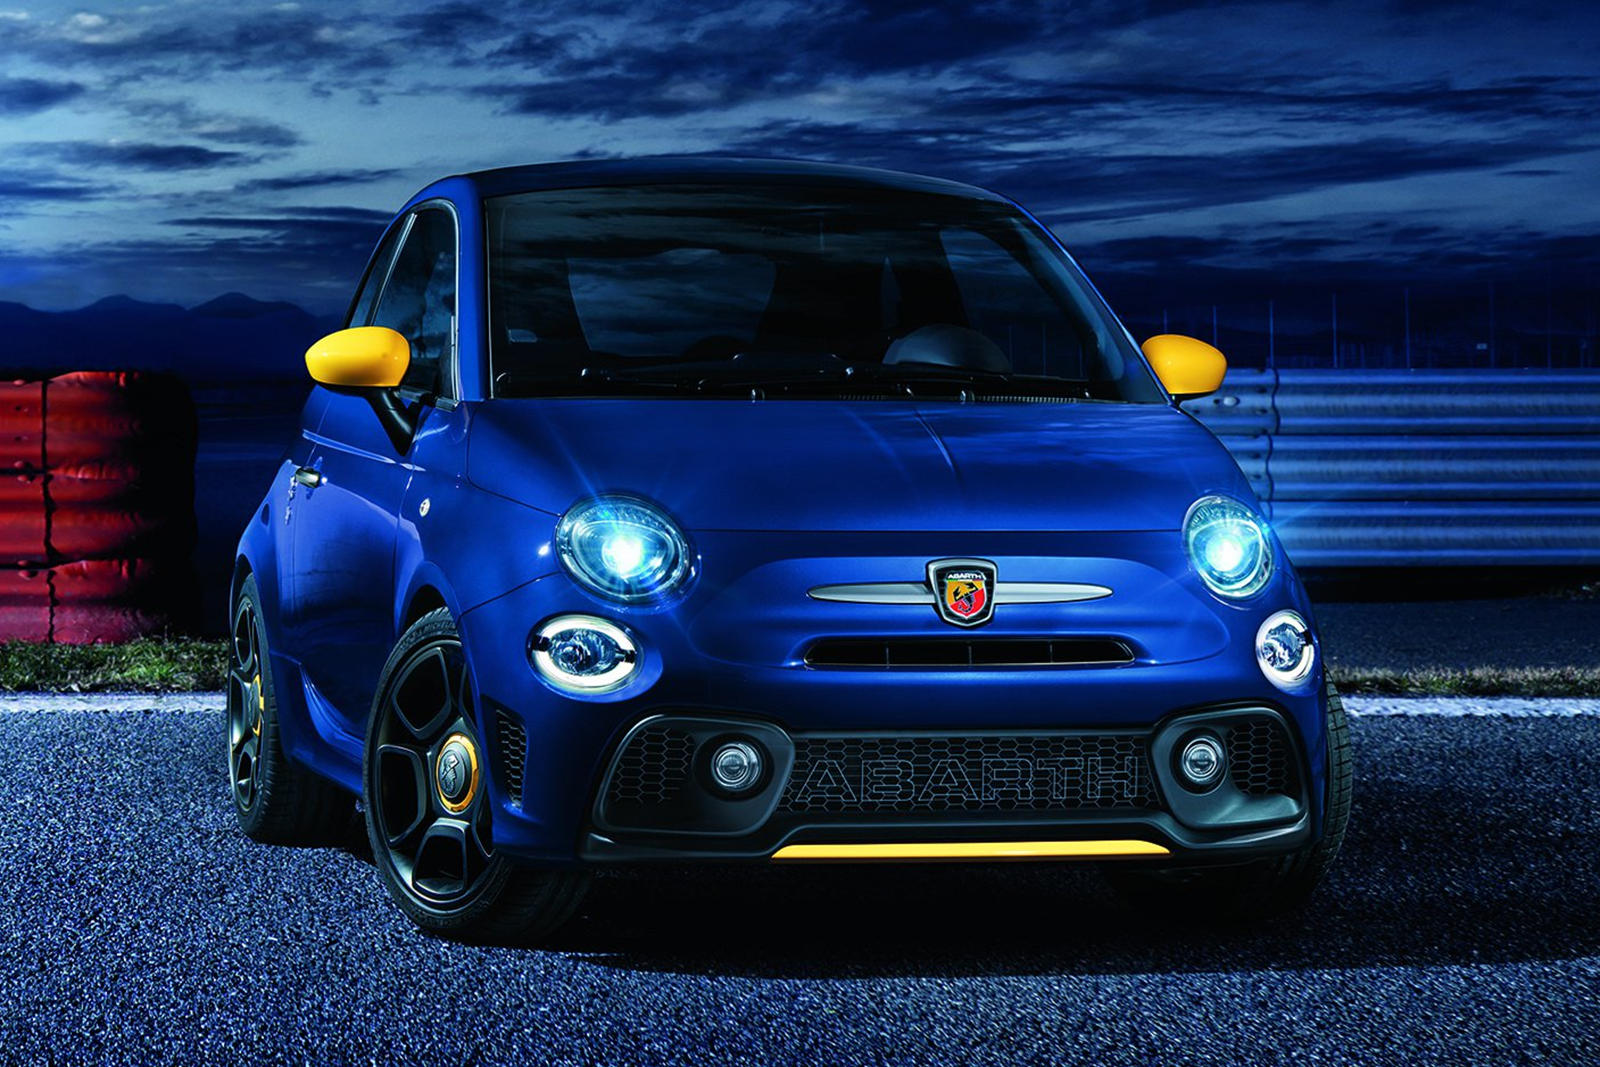 2019 Abarth 595 Arrives With Aggressive Styling And Louder